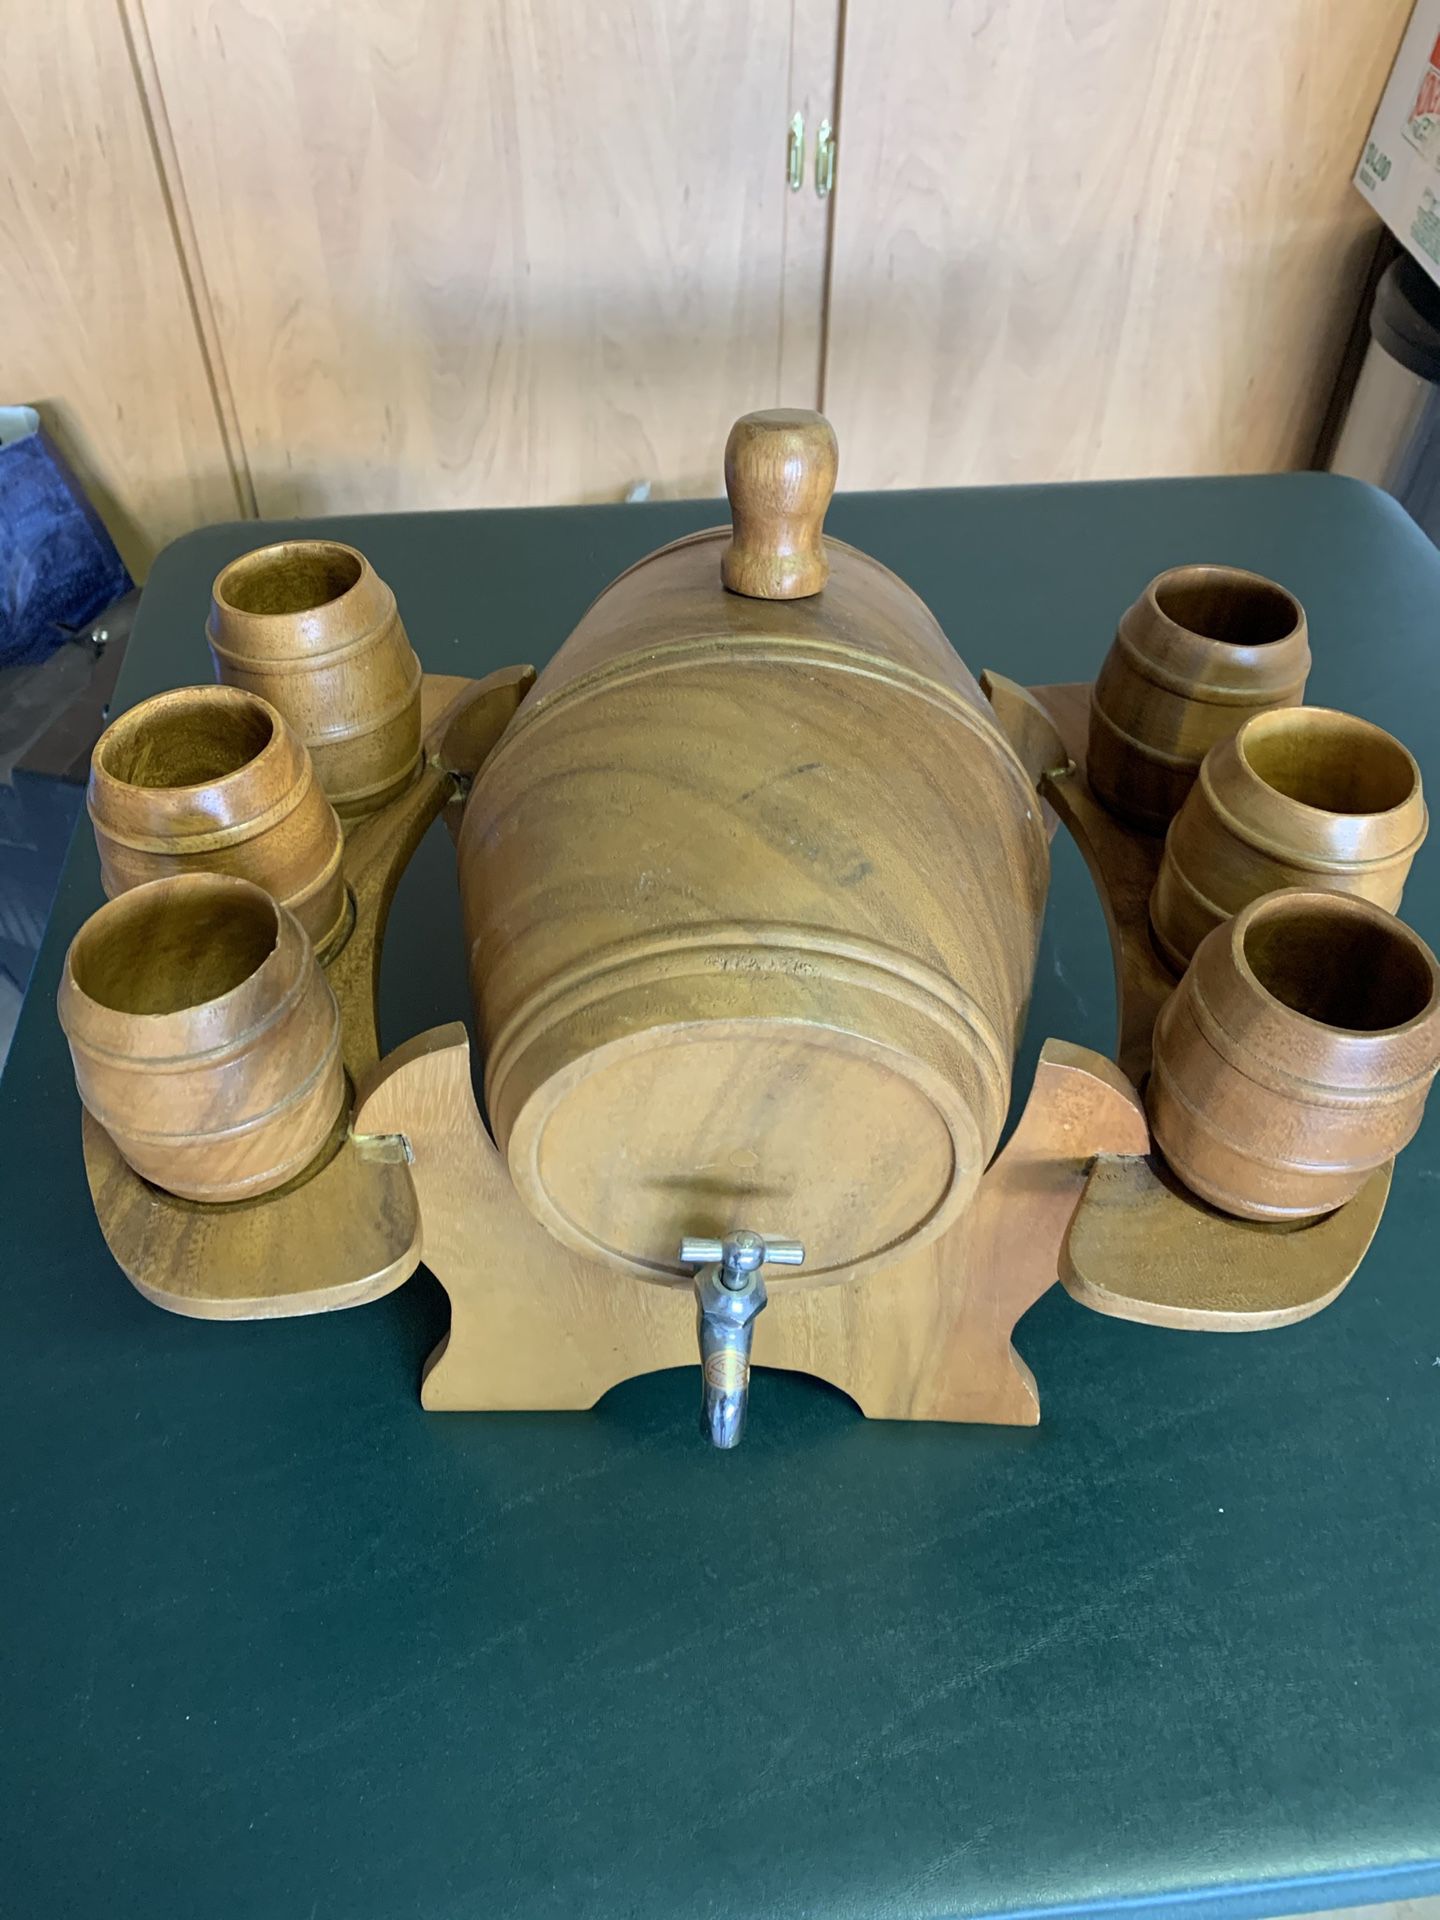 Vintage wooden barrel with 6 cups